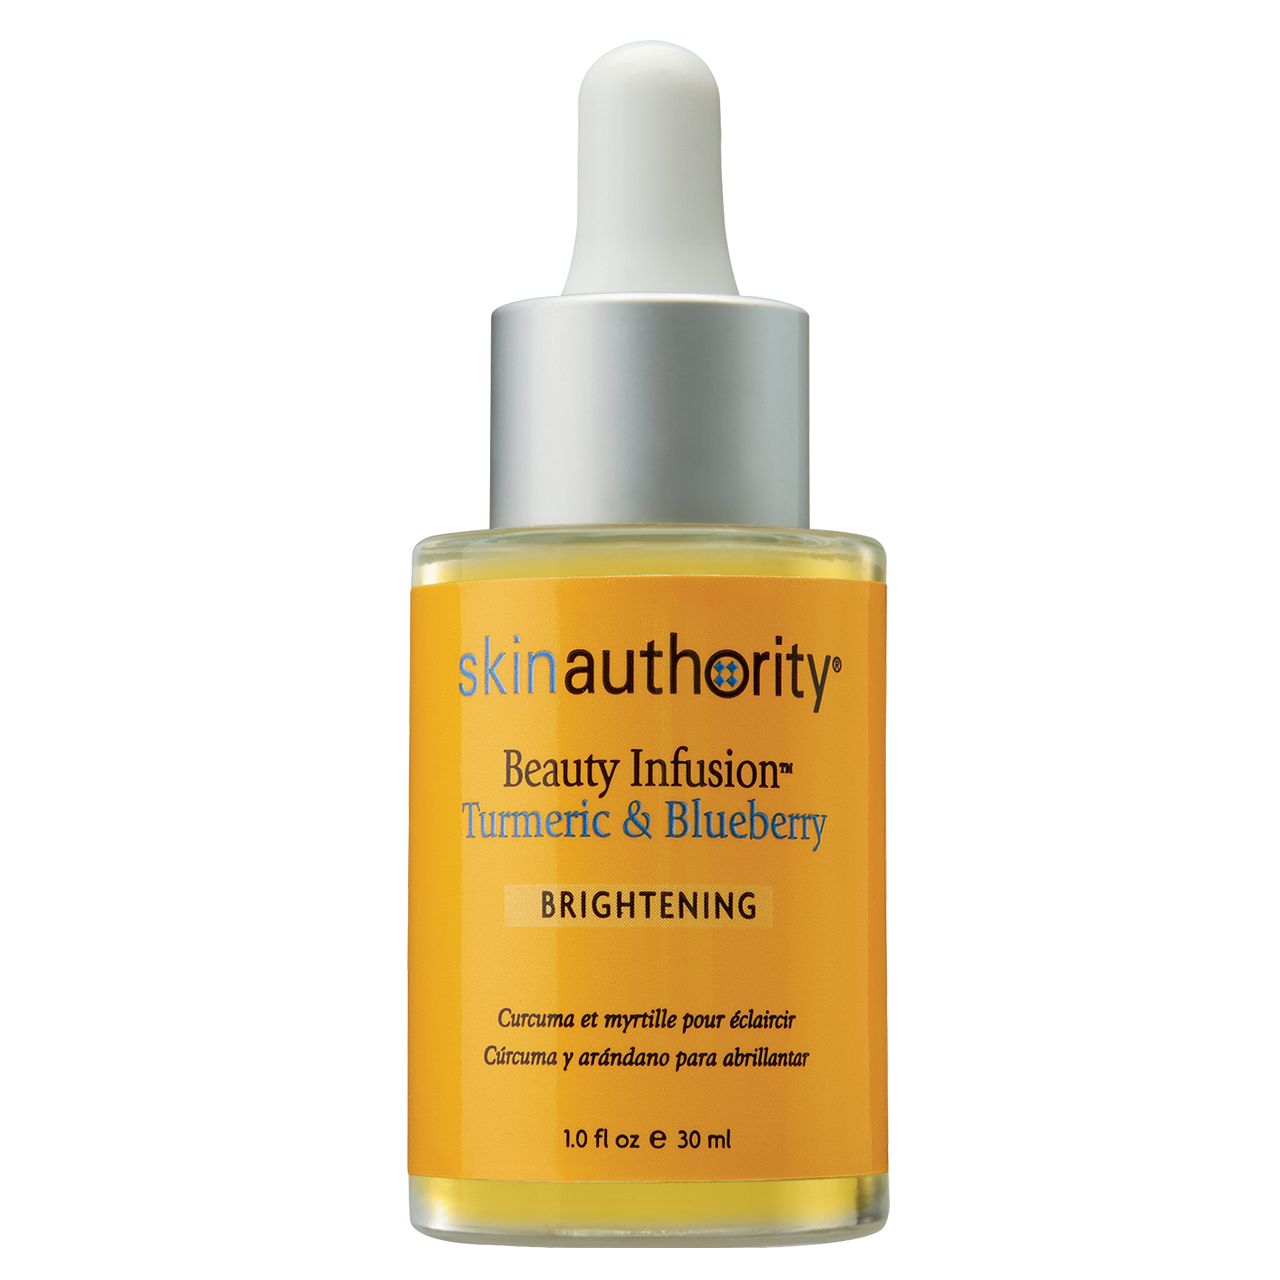 Beauty Infusion Turmeric & Blueberry for Brightening | Skin Authority